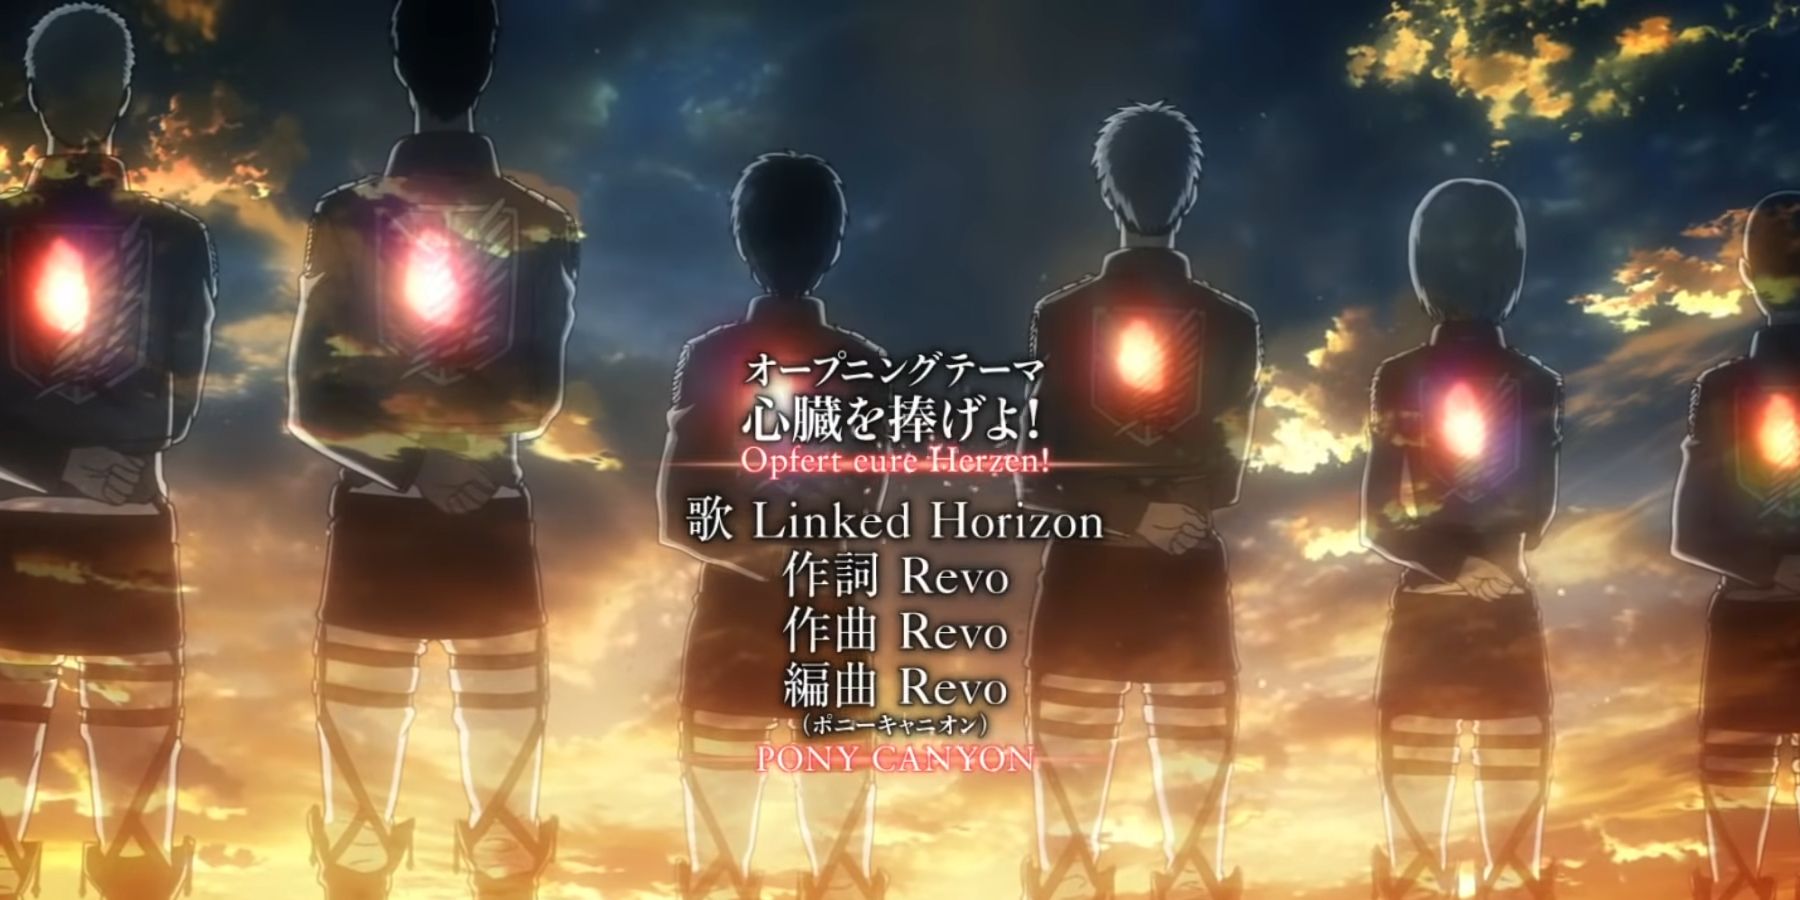 AOT soldiers with their hearts lit up